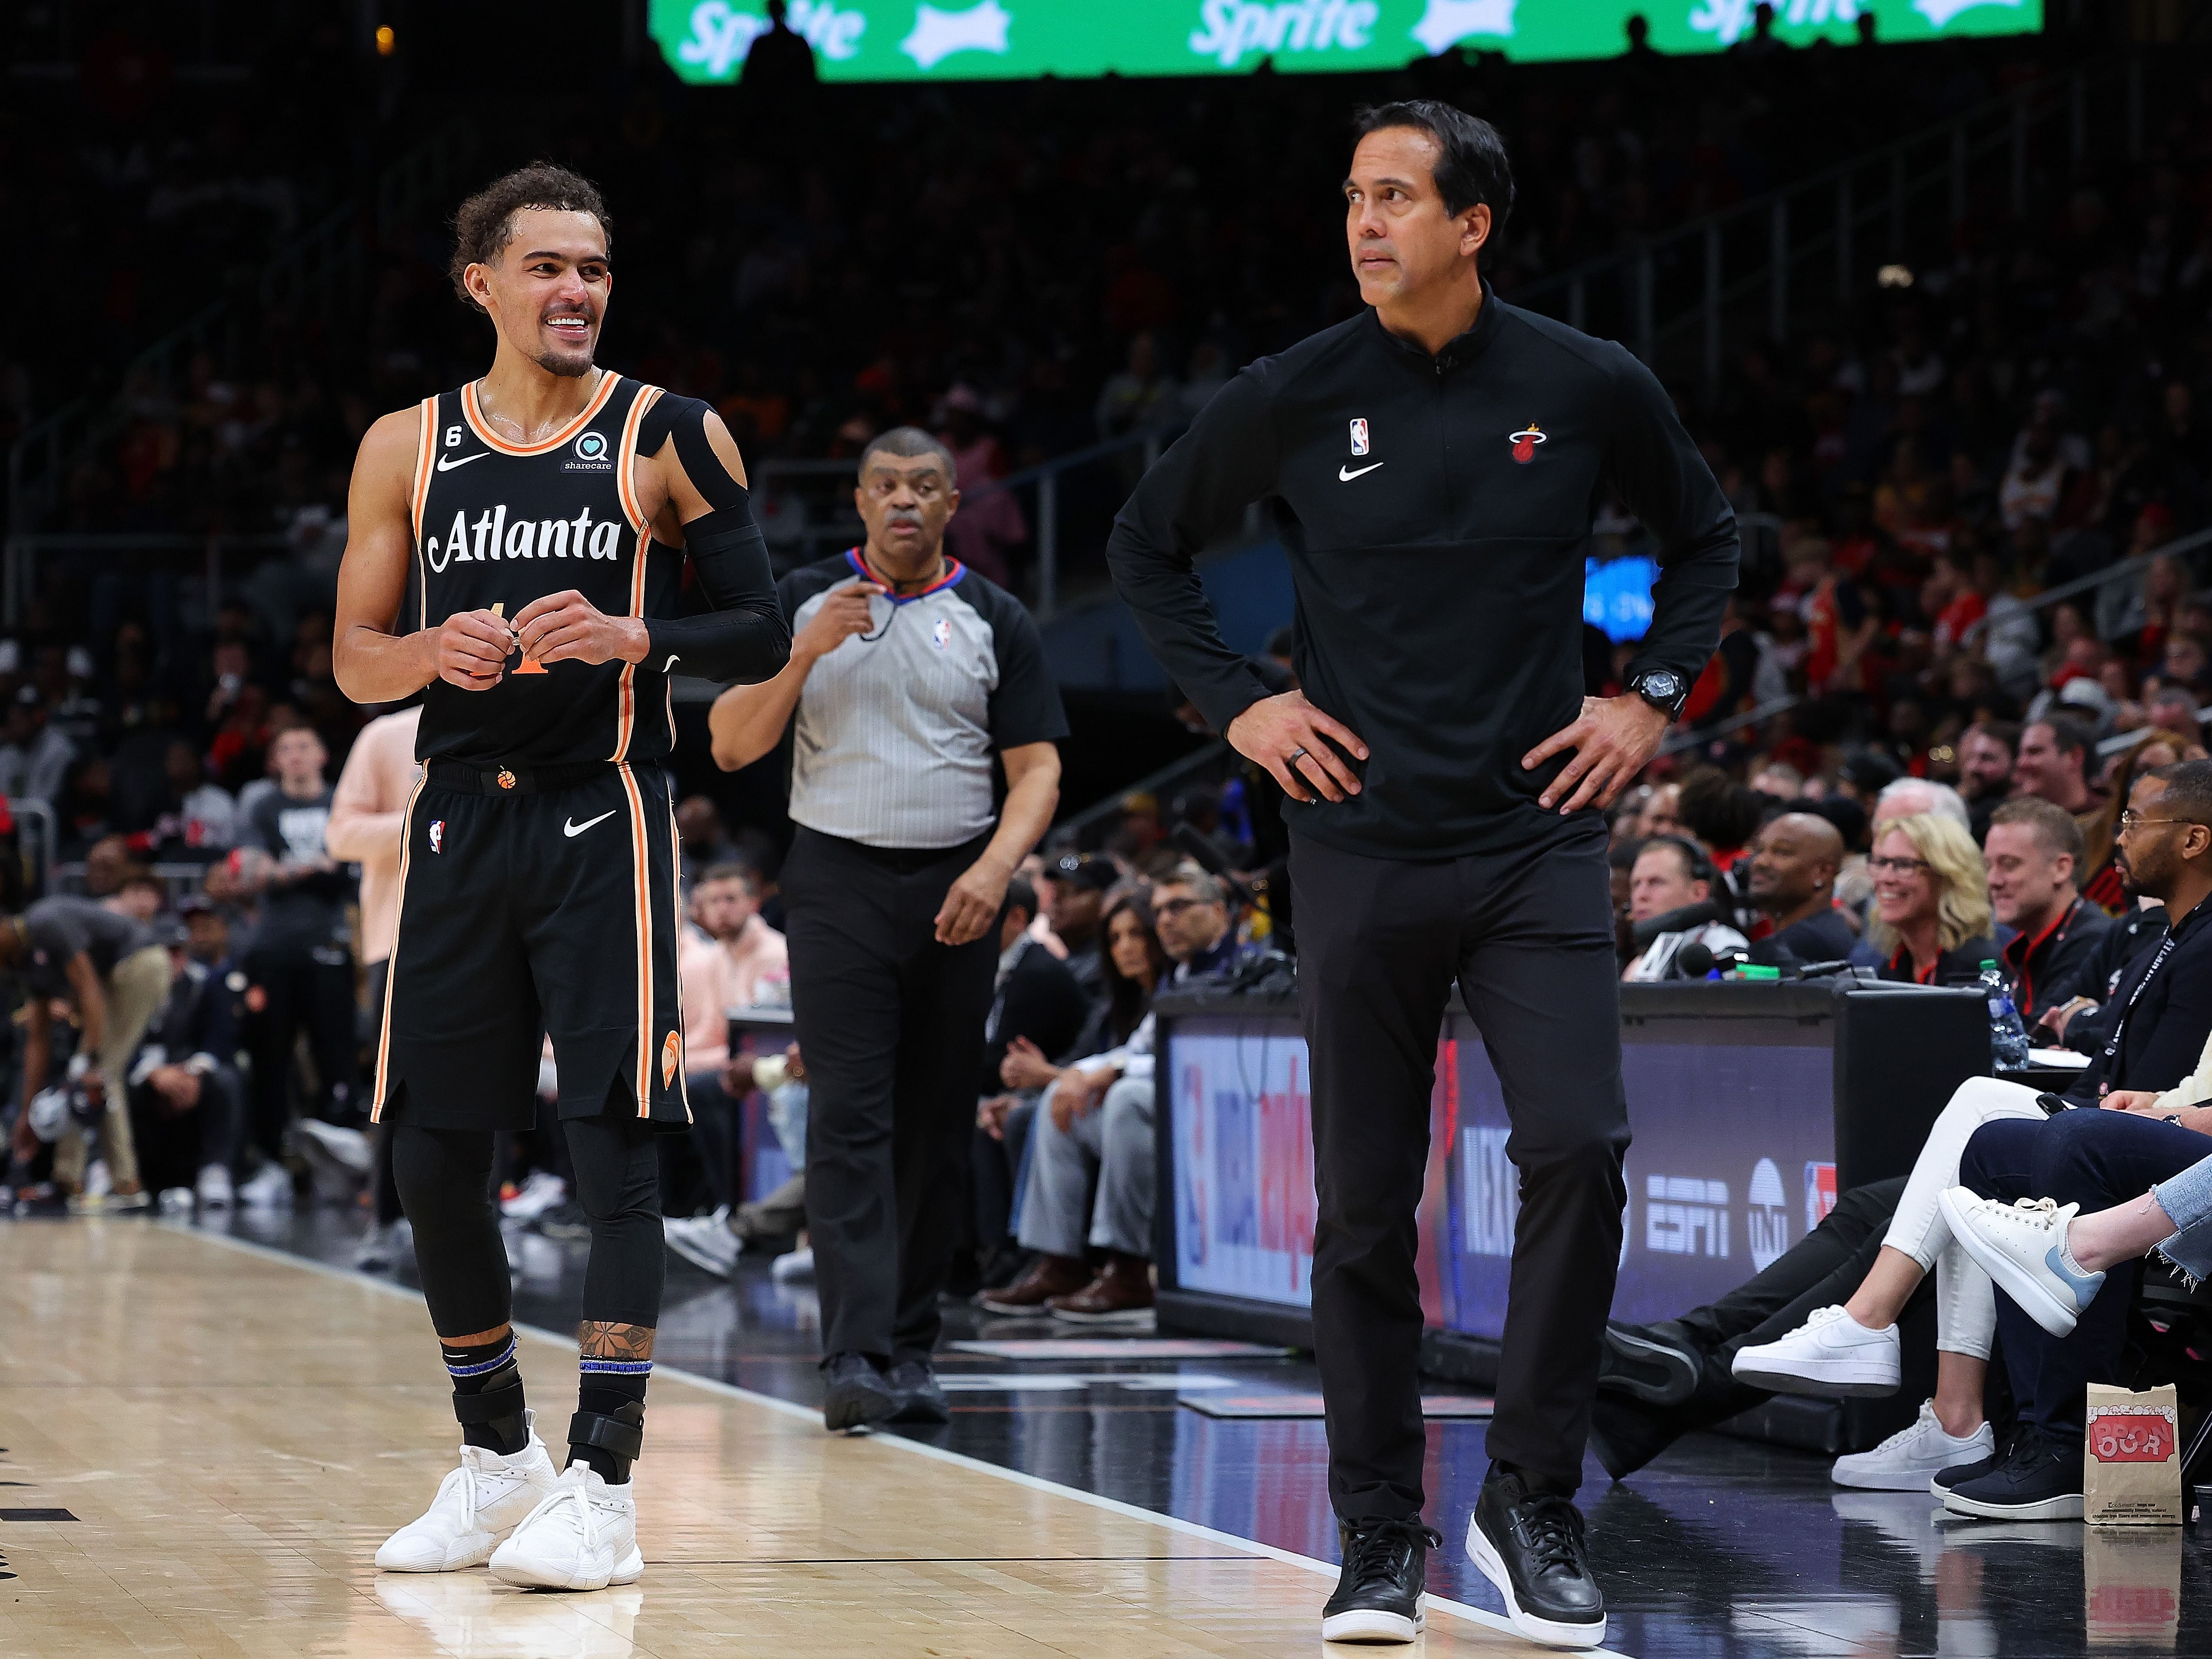 op 3 potential landing spots for Trae Young if Atlanta Hawks decides to trade him